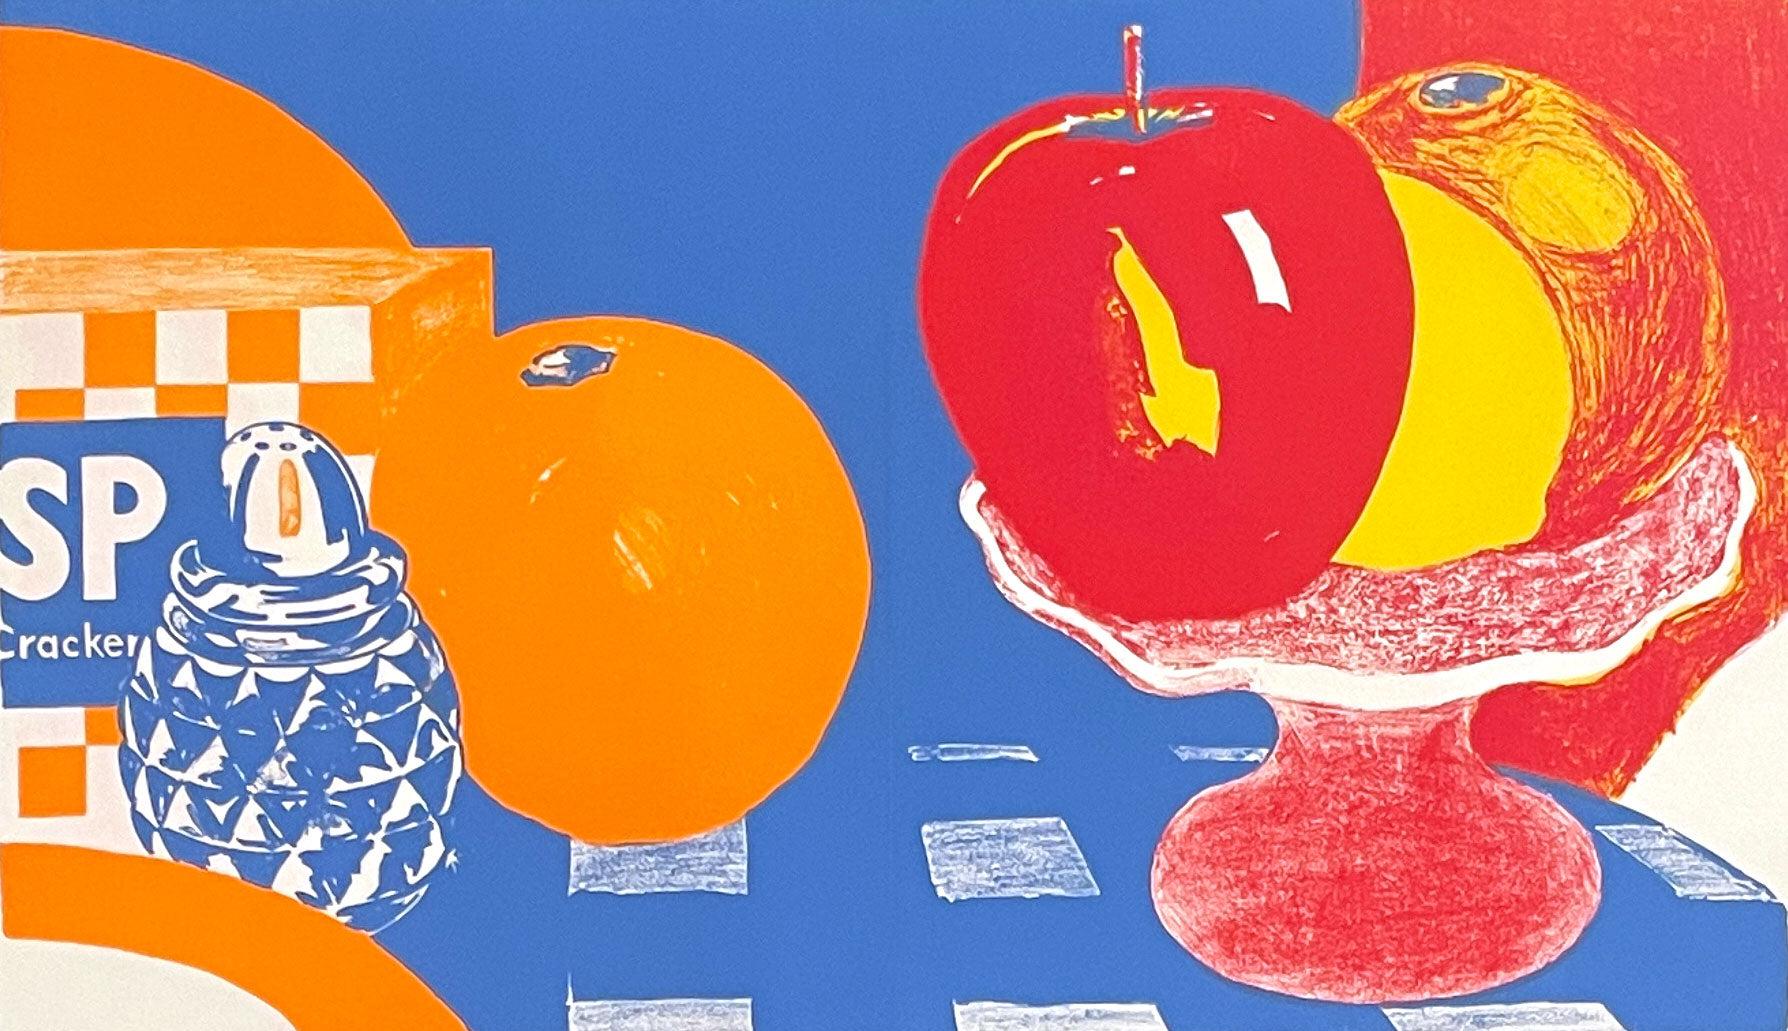 How does Tom Wesselmann use lines in his work Still Life with Fuji?